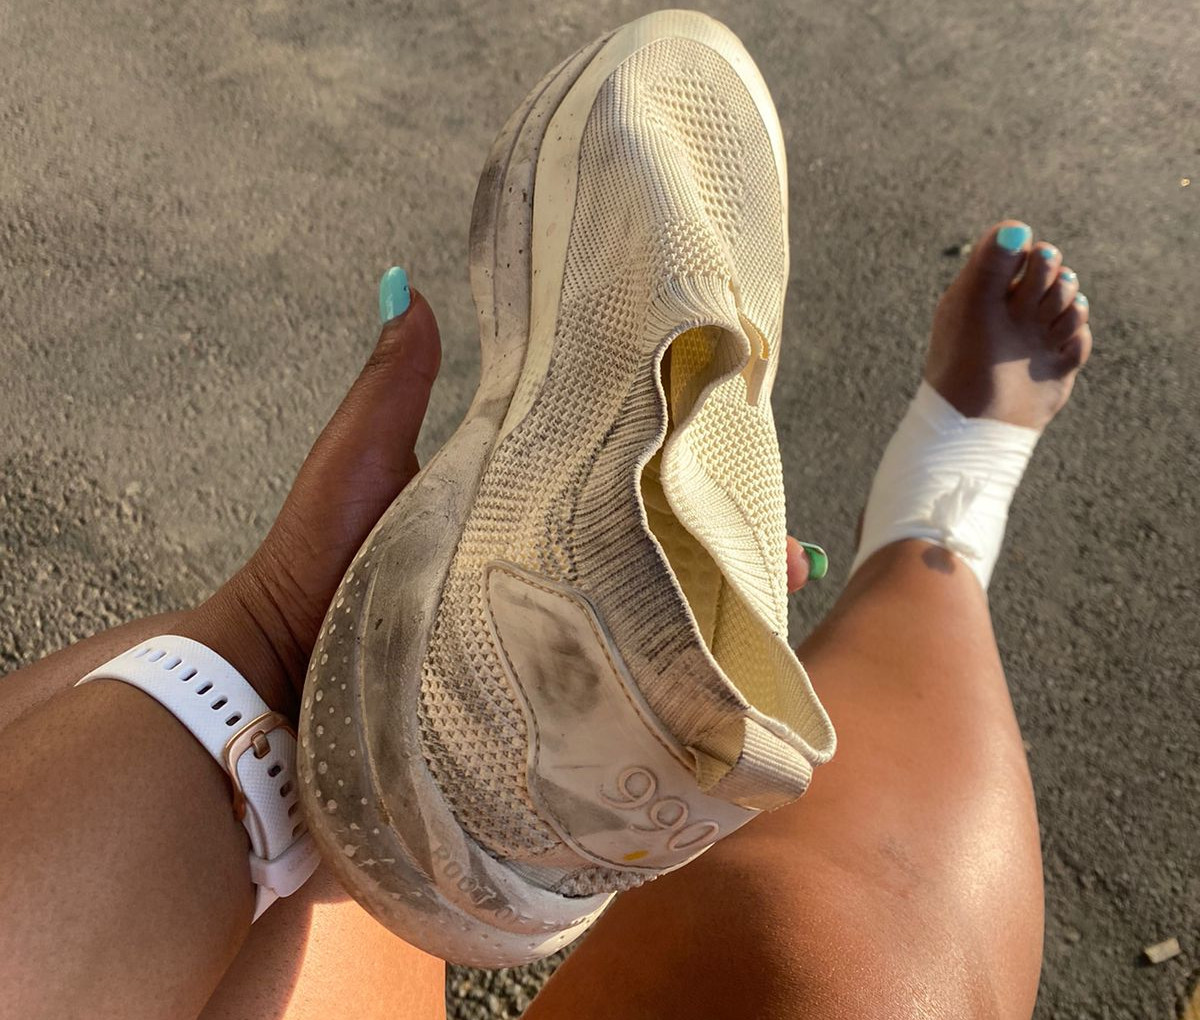 Cassper Nyovest Quips That Drip RF990 Sneakers Will Save SA Hip Hop After Saving Anele's Ankle